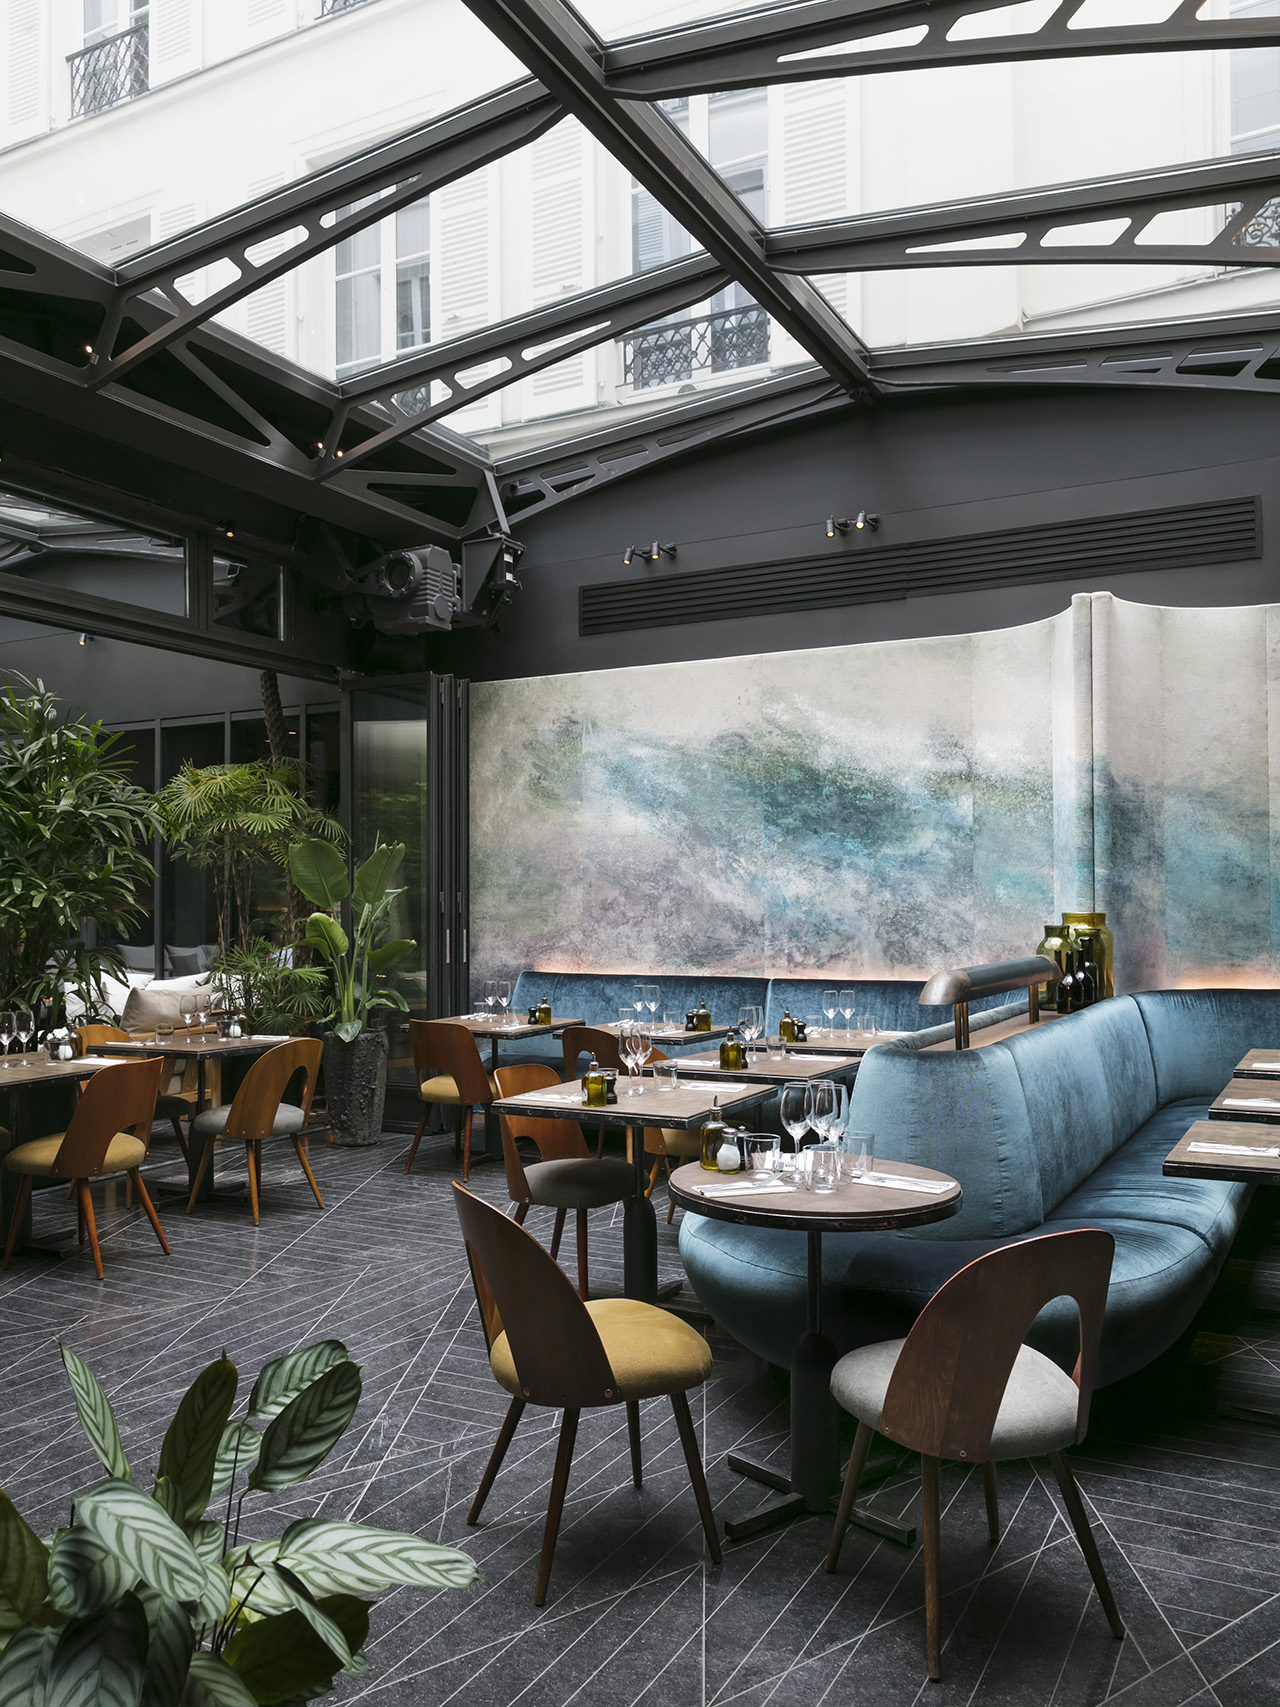 A blue-green sci-fi style restaurant with a retractable ceiling and abstract panel art at Hôtel National des Arts et Métiers in Paris